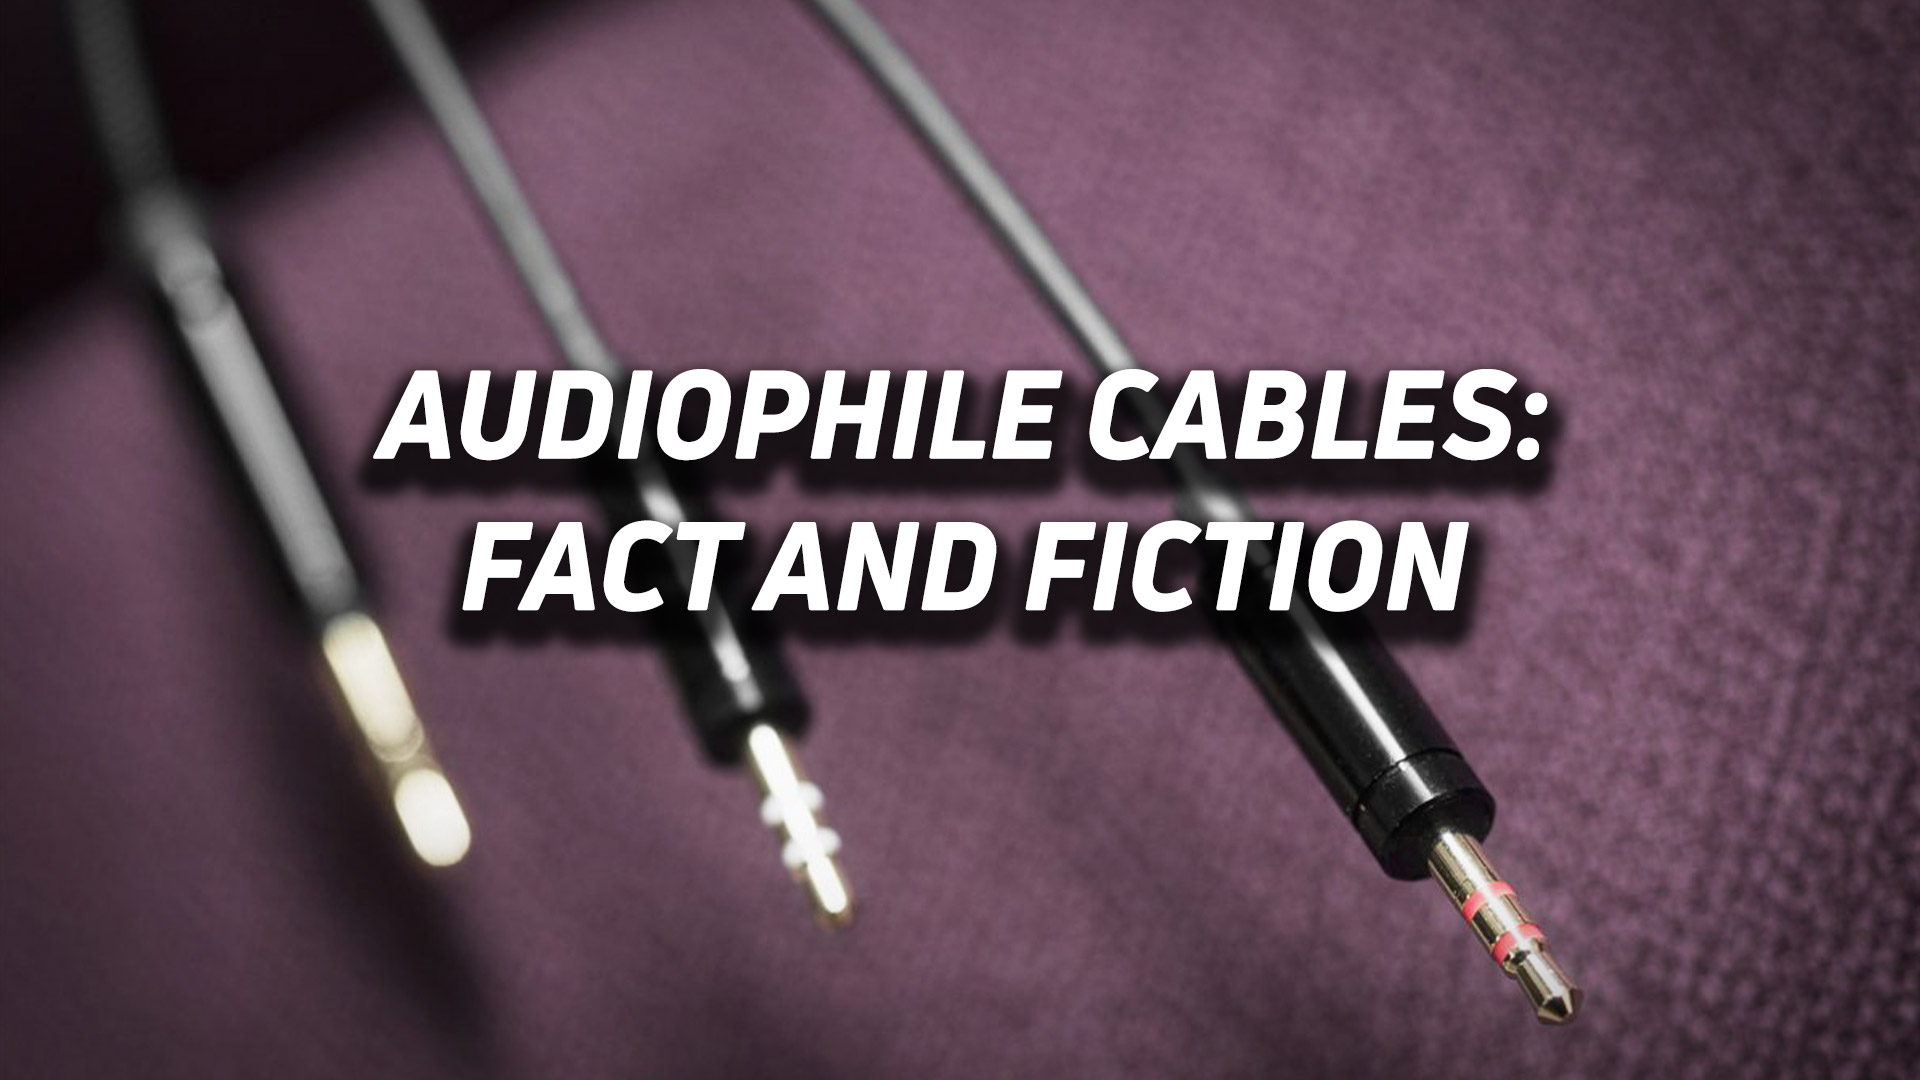 A line of 3.5mm headphone cables against a purple background with the text "Audiophile cables: fact and fiction" overlaid.